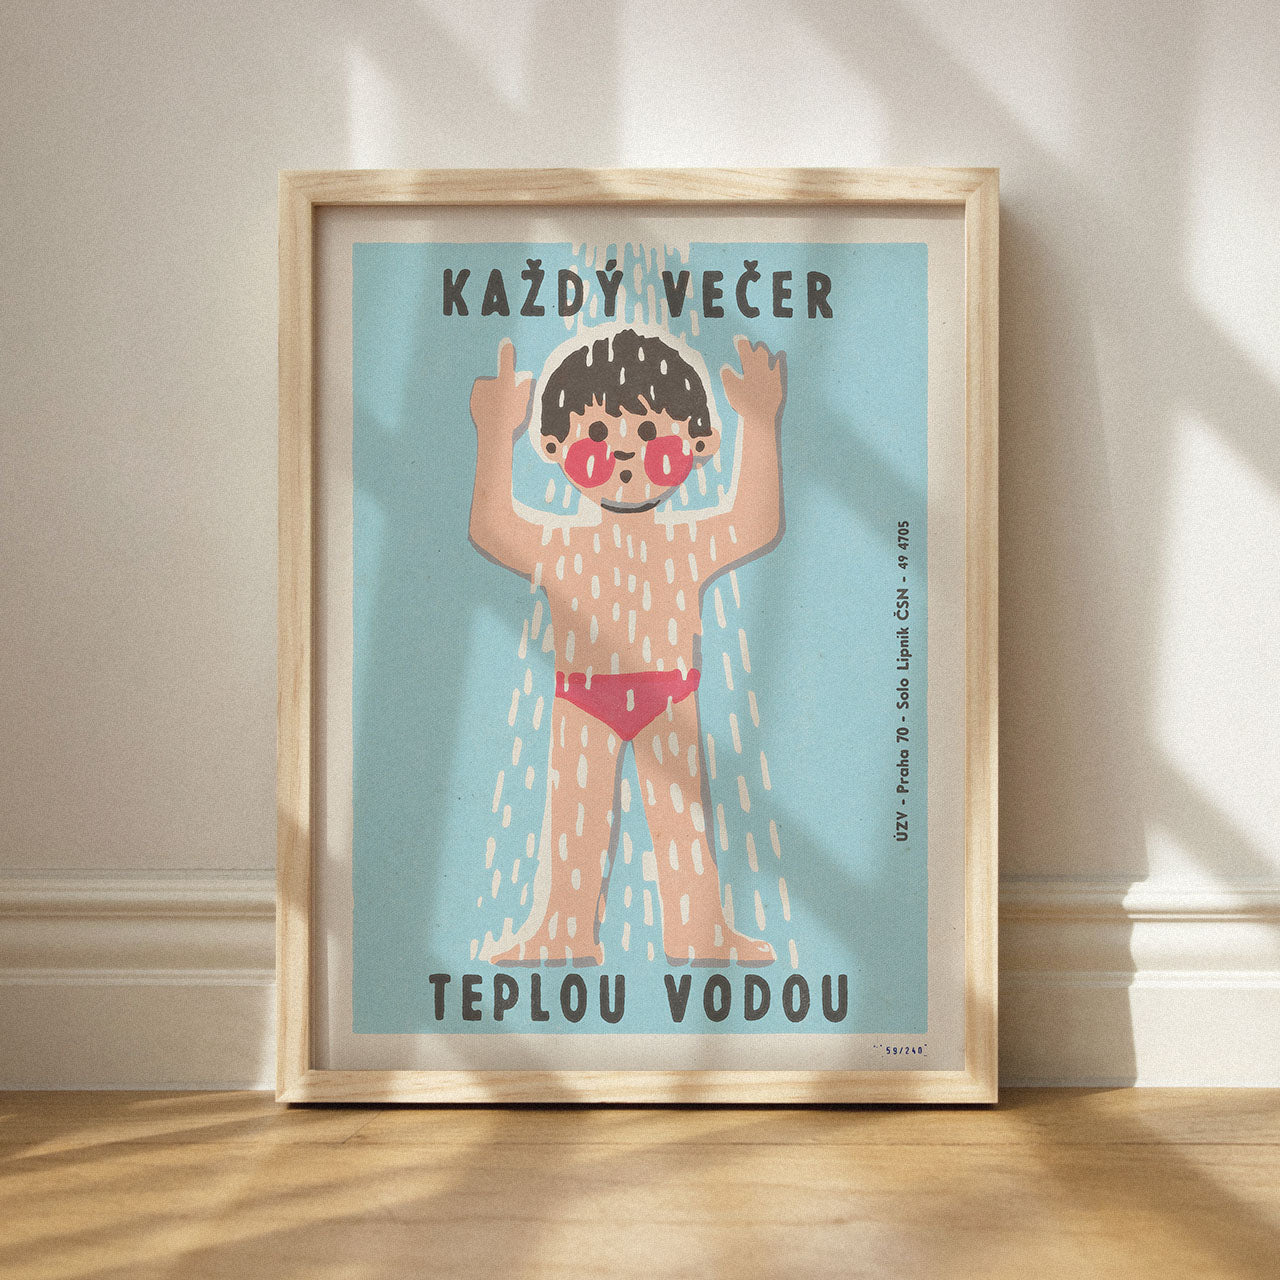 Every evening with warm water - Poster 30x40 cm 